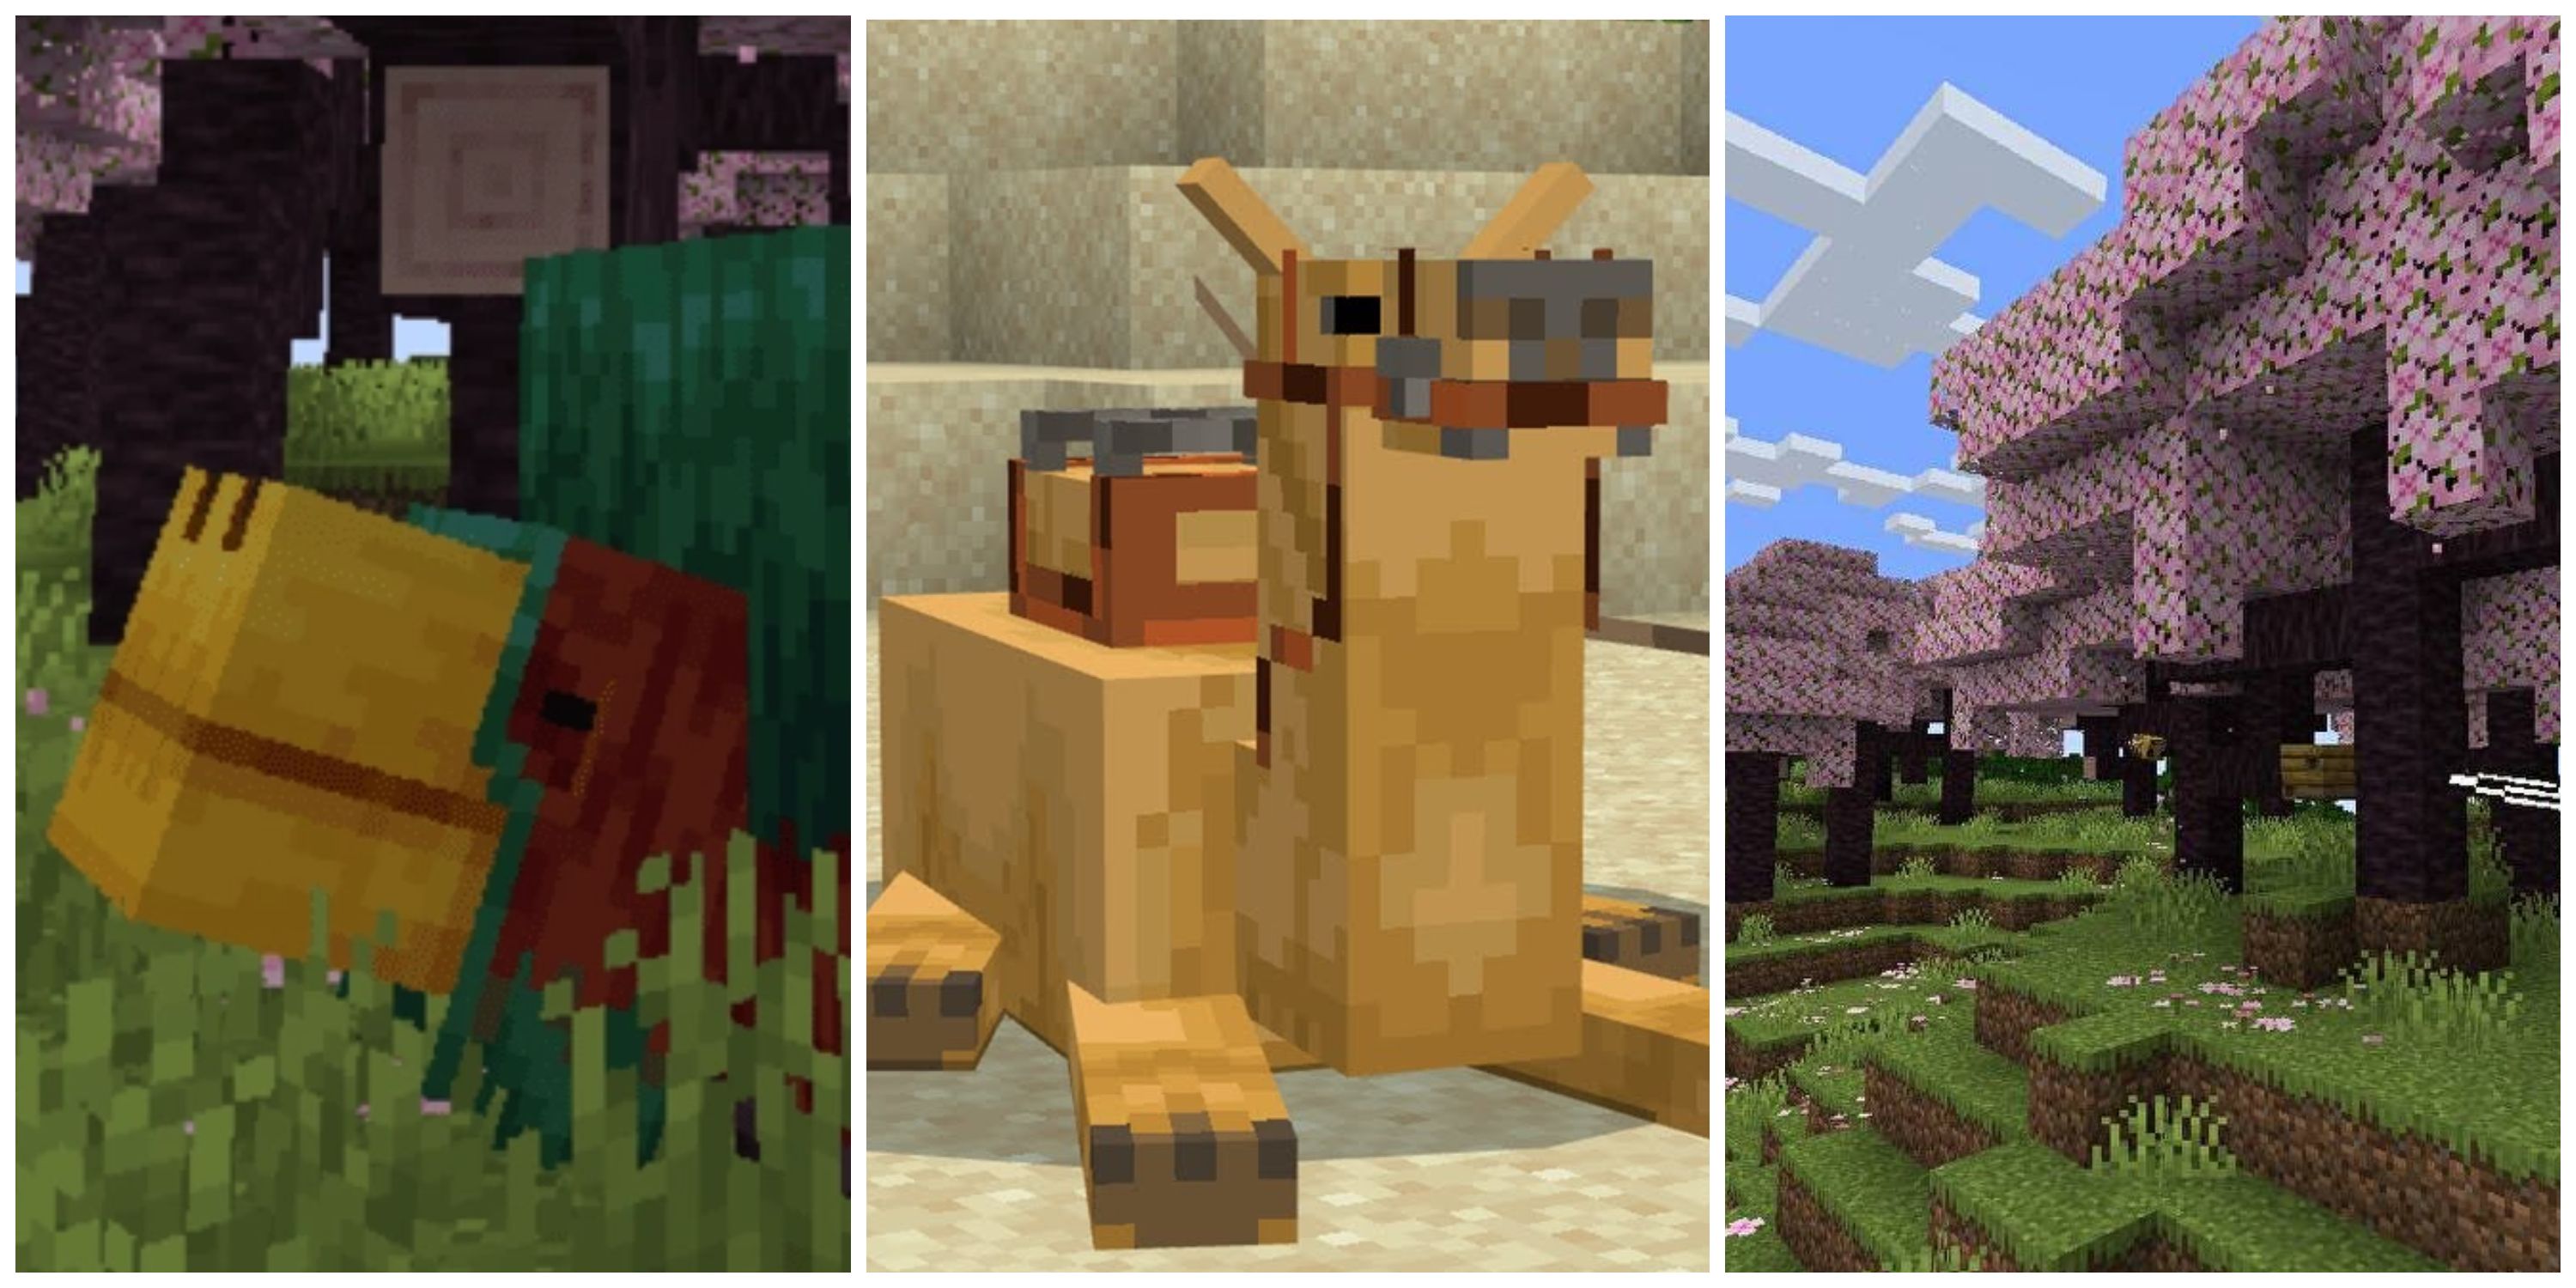 sniffer, camel and cherry blossom tree in minecraft